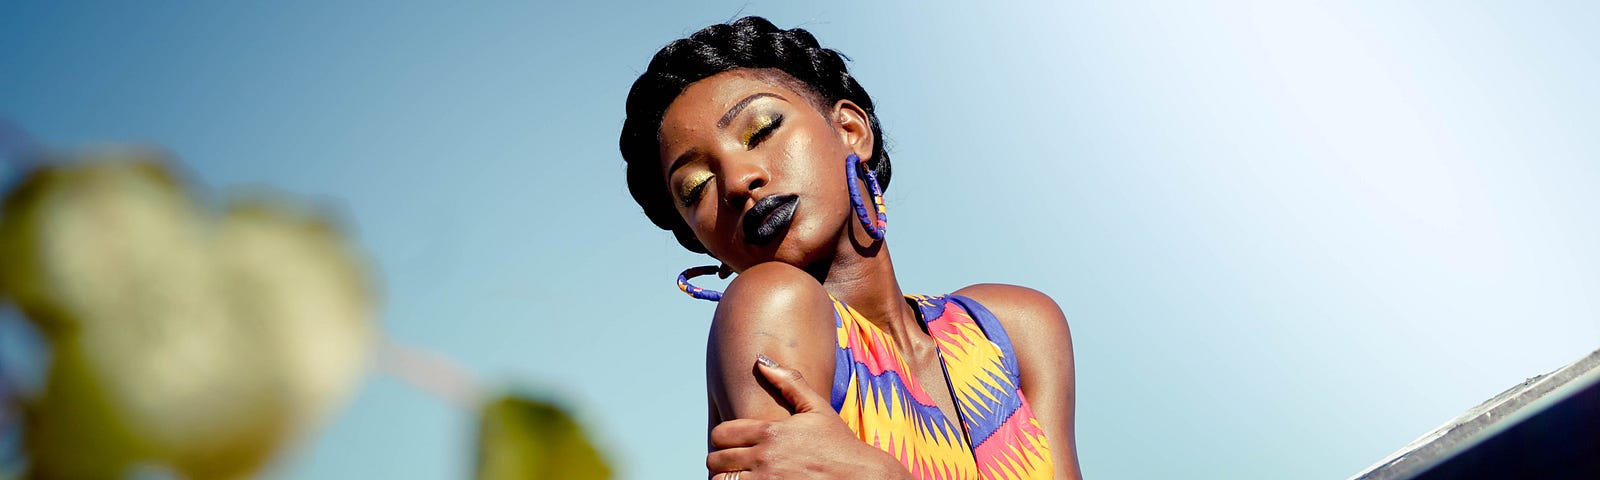 A gorgeous Black woman, braided hair and colorful dress, basks in the sun.